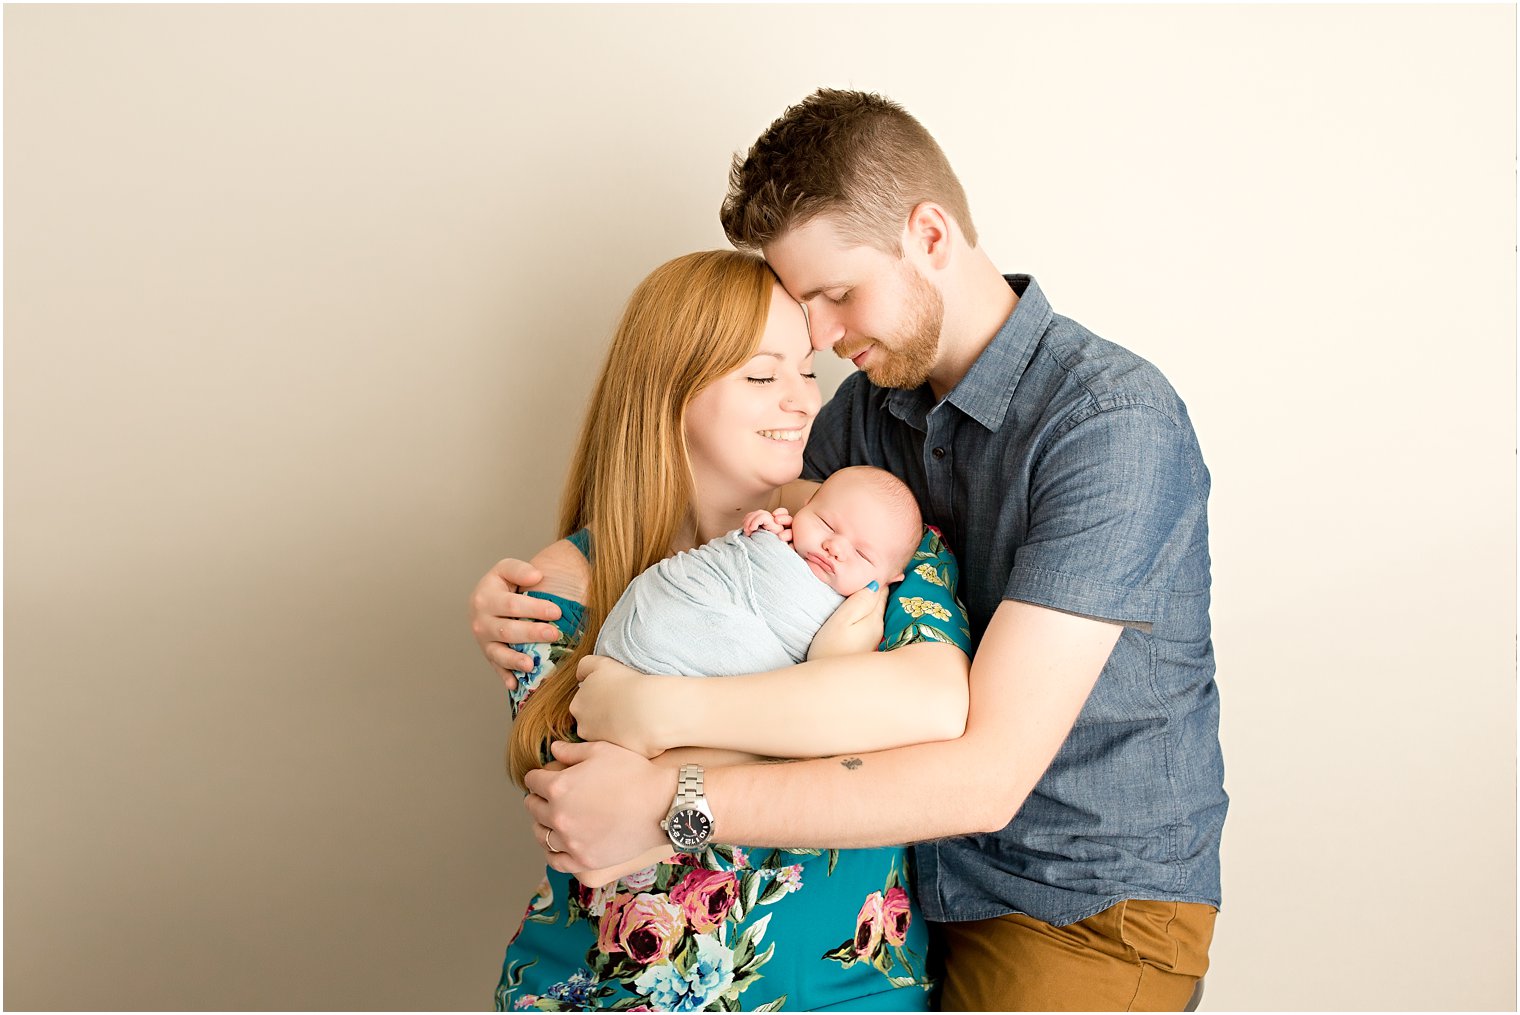 Newborn session for new parents